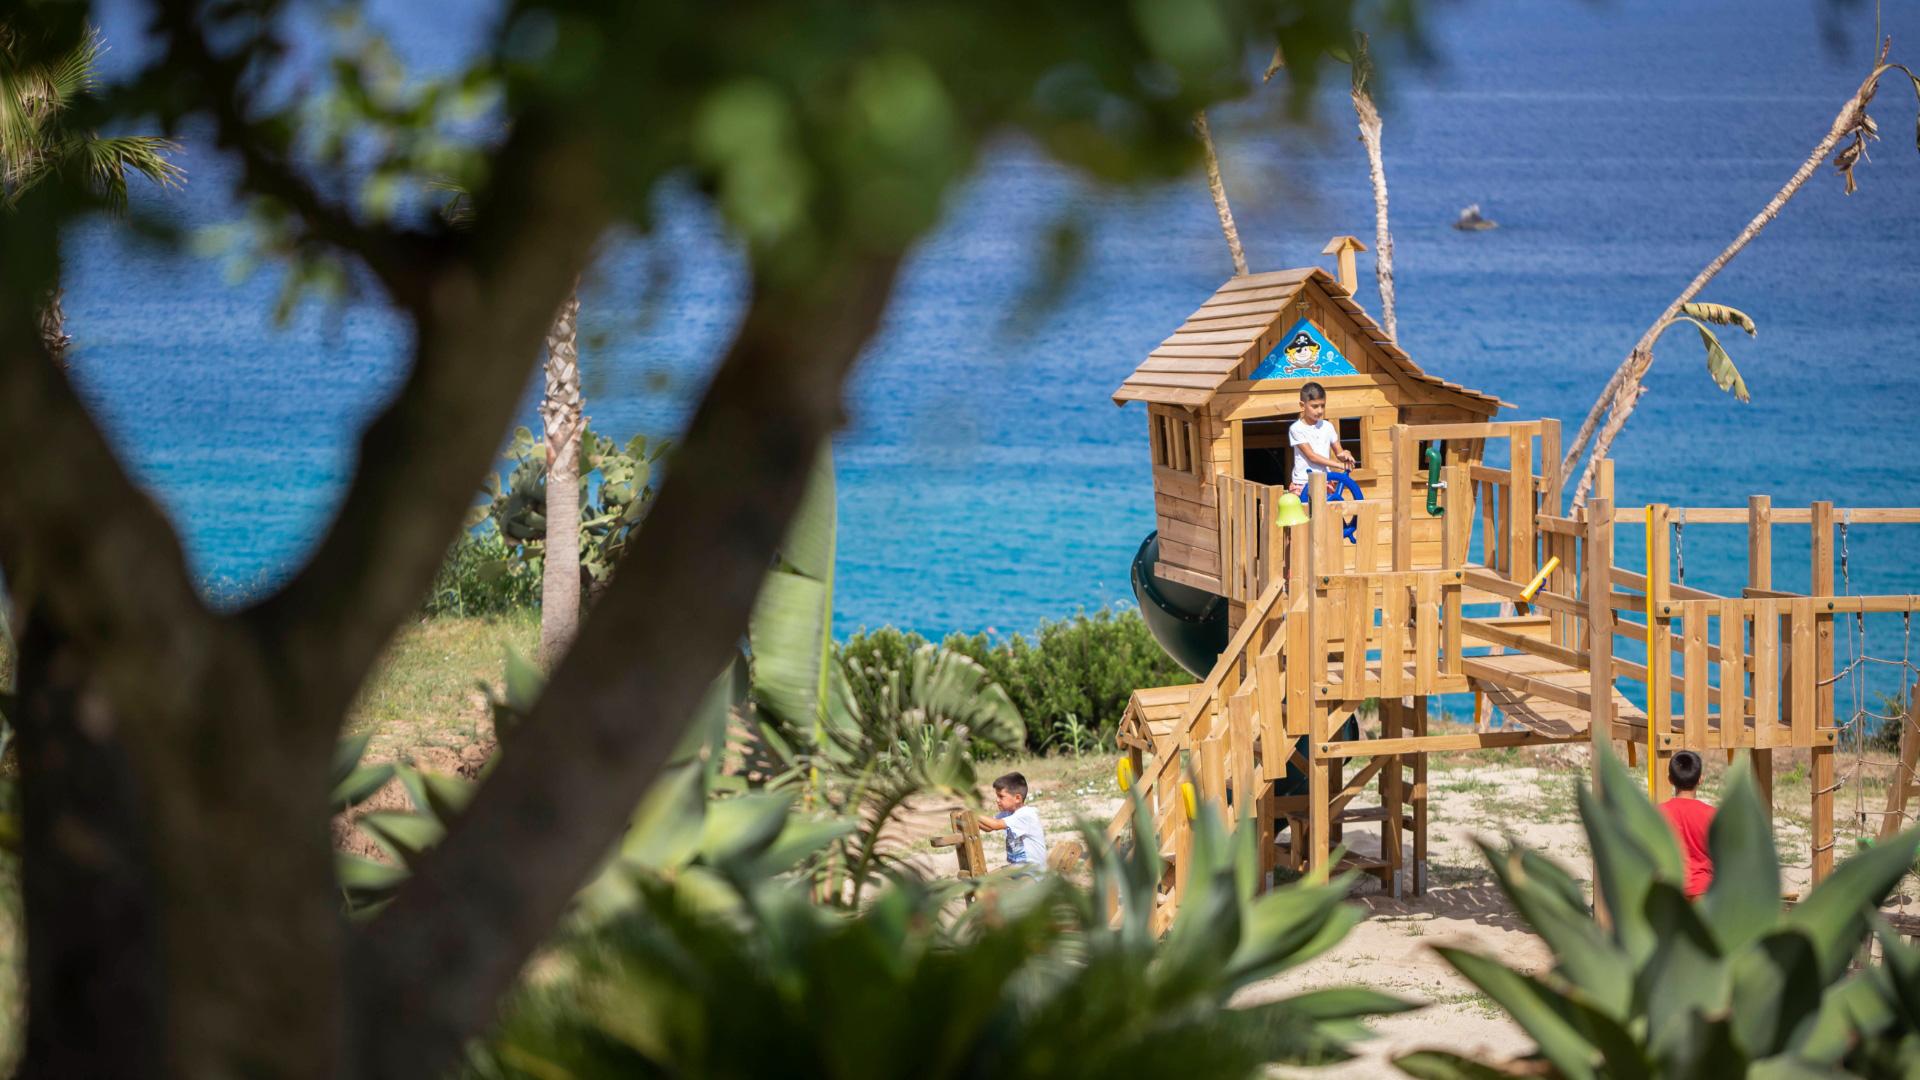 Children playing in a treehouse by the sea.